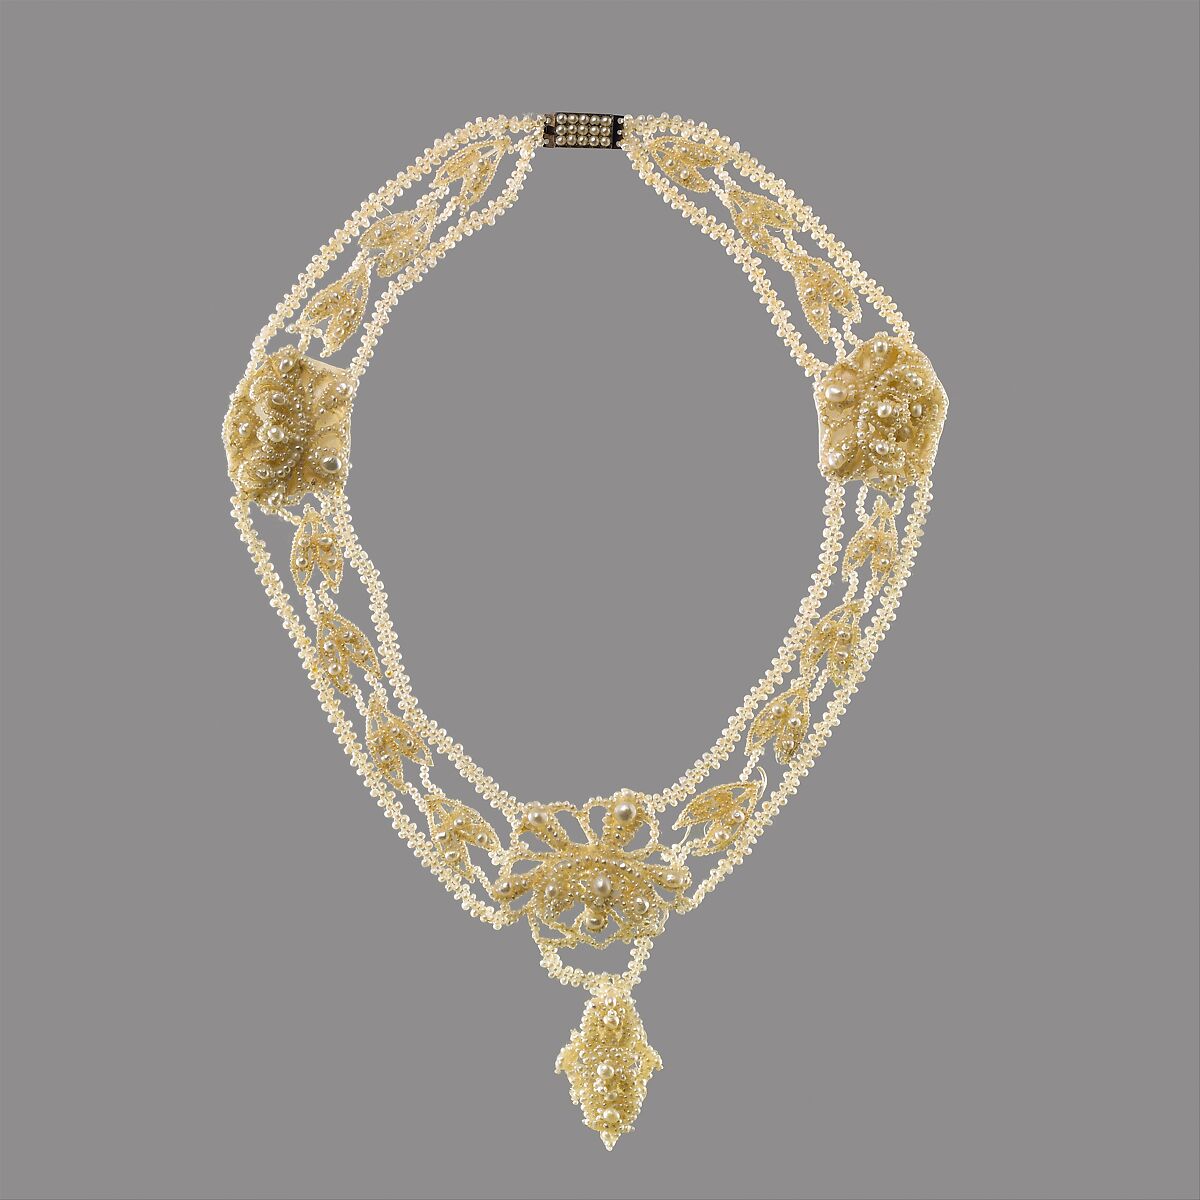 Necklace, Seed pearls, mother-of-pearl, horsehair, silk and yellow gold 